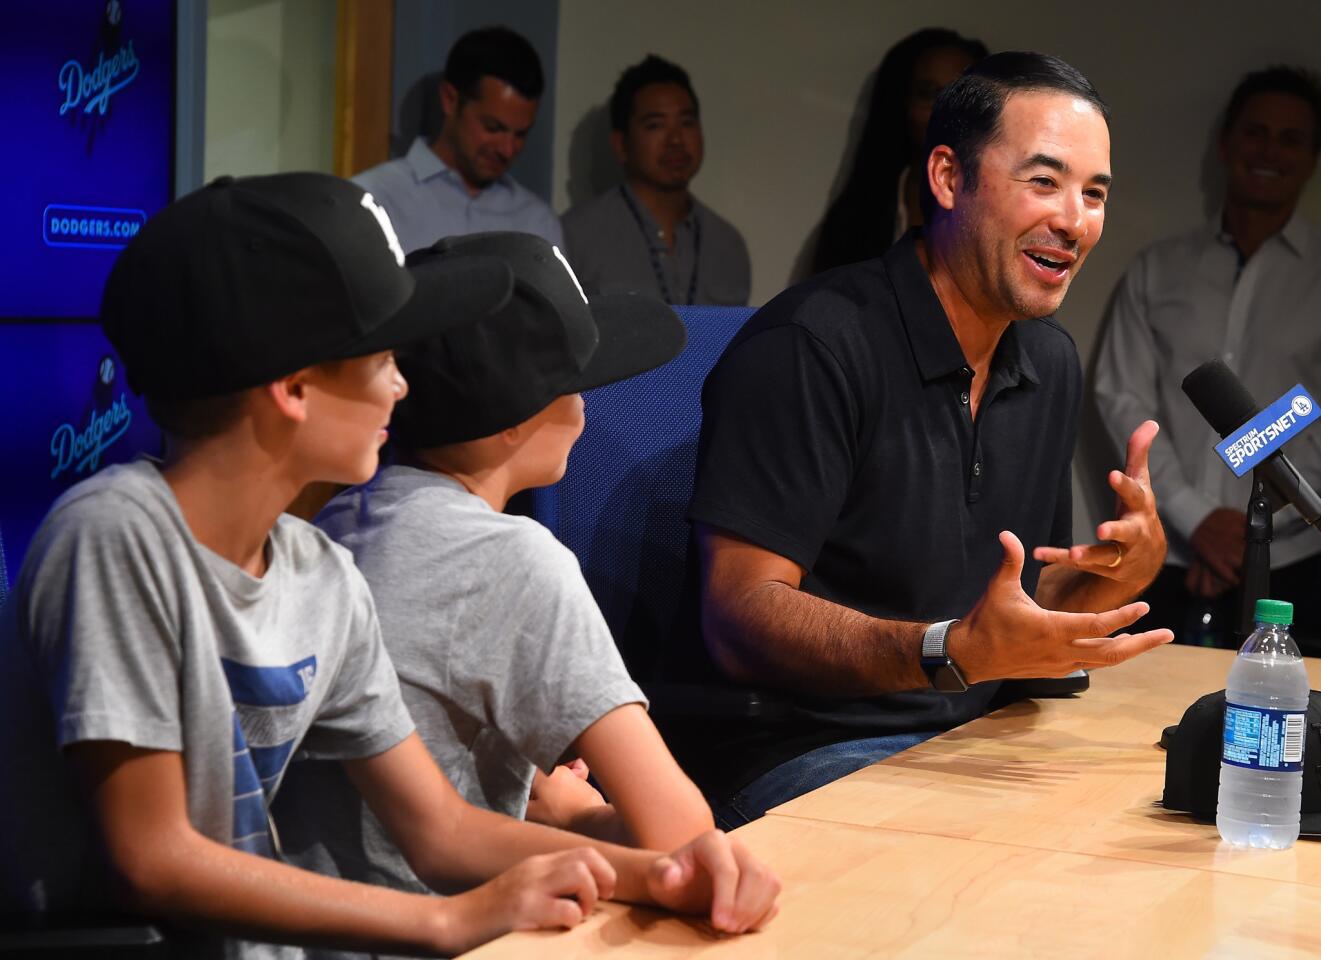 LOS ANGELES, CA - AUGUST 03: Former MLB player Andre Either answers questions from the media about his retirement as his sons Retton, 8 and Dreson, 10 look on before the game between the Los Angeles Dodgers and the Houston Astros at Dodger Stadium on August 3, 2018 in Los Angeles, California. (Photo by Jayne Kamin-Oncea/Getty Images) ** OUTS - ELSENT, FPG, CM - OUTS * NM, PH, VA if sourced by CT, LA or MoD **